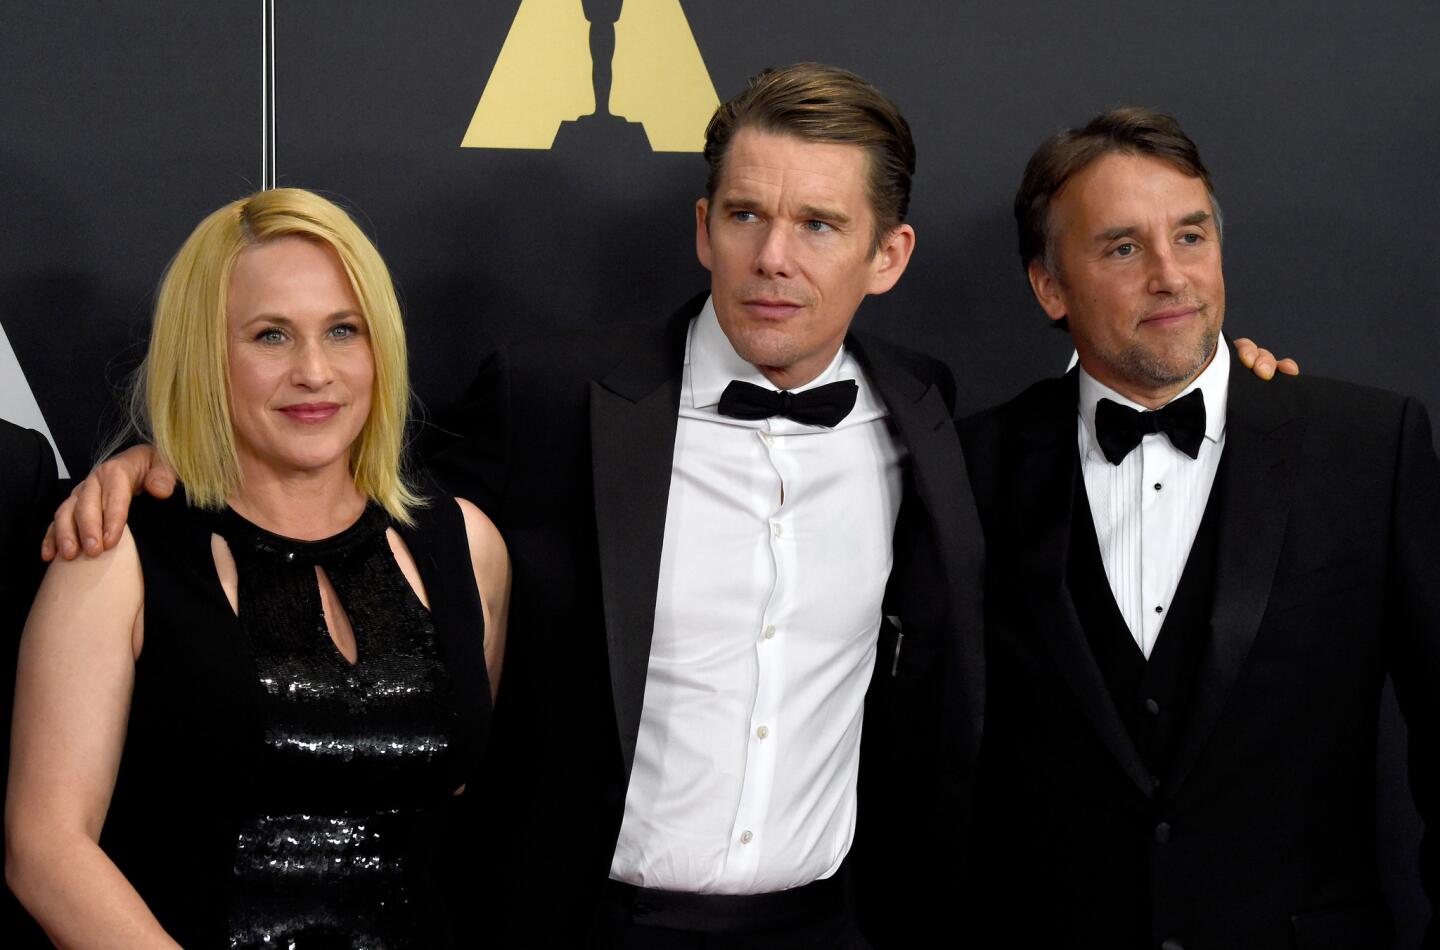 Actress Patricia Arquette, actor Ethan Hawke and director Richard Linklater attend the Academy Of Motion Picture Arts And Sciences' 2014 Governors Awards at the Ray Dolby Ballroom at Hollywood & Highland Center in Hollywood.